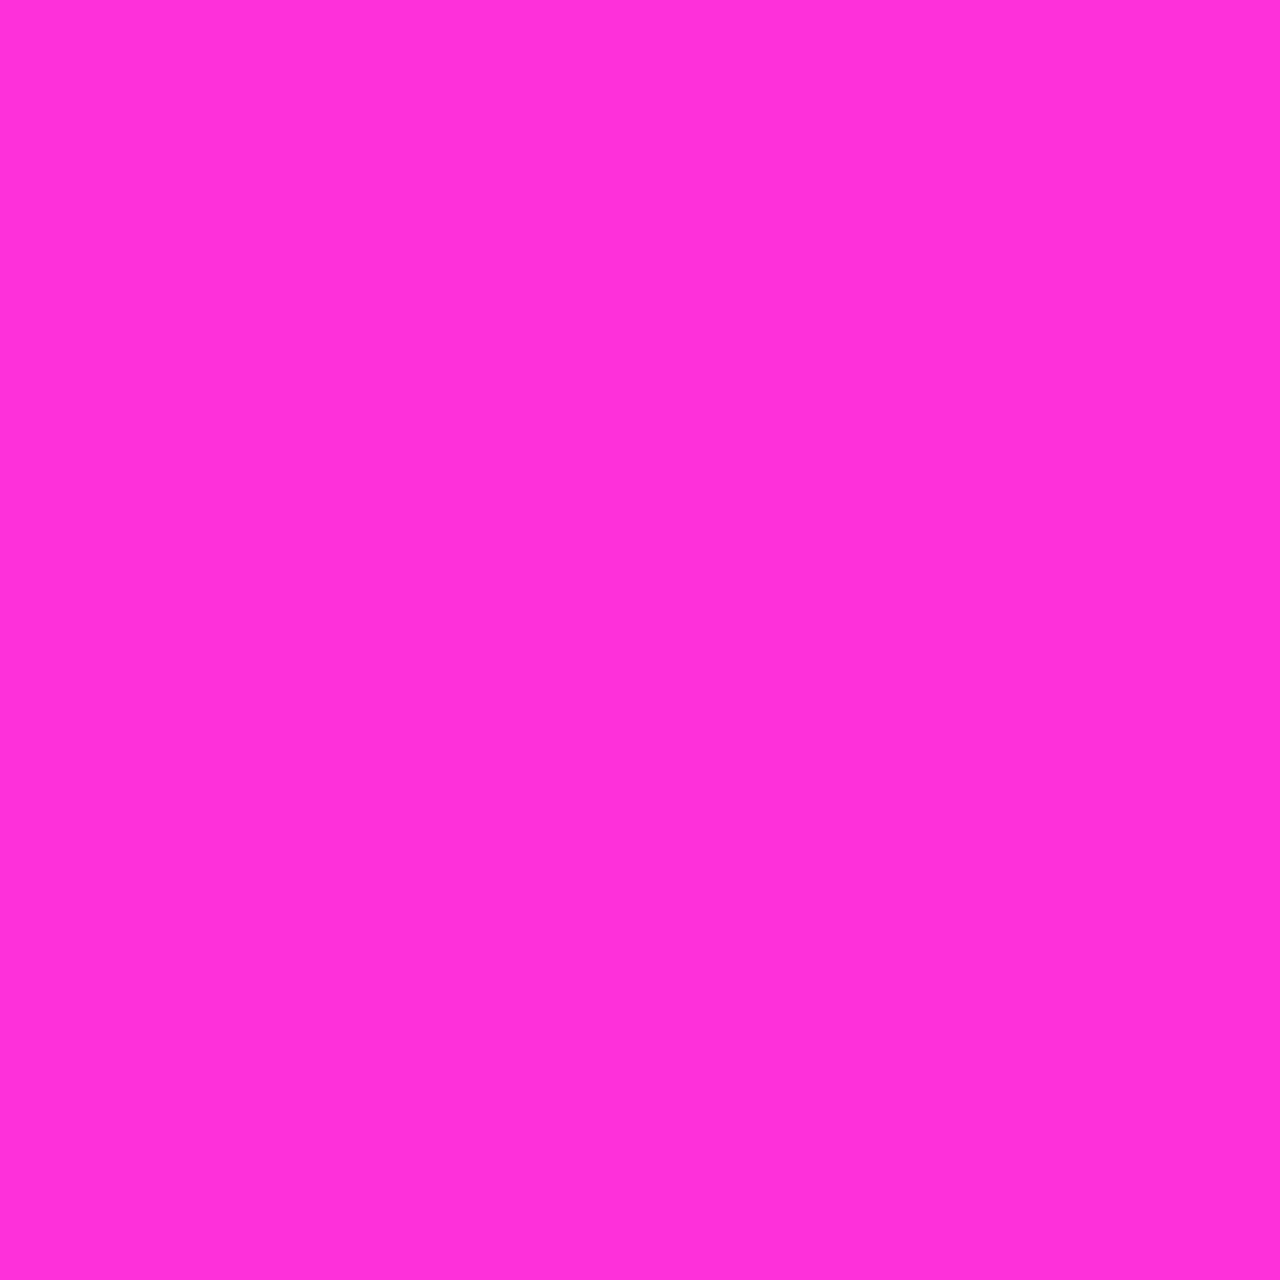 Fadeless Paper Roll, Magenta, 24 Inches x 60 Feet - image 1 of 1